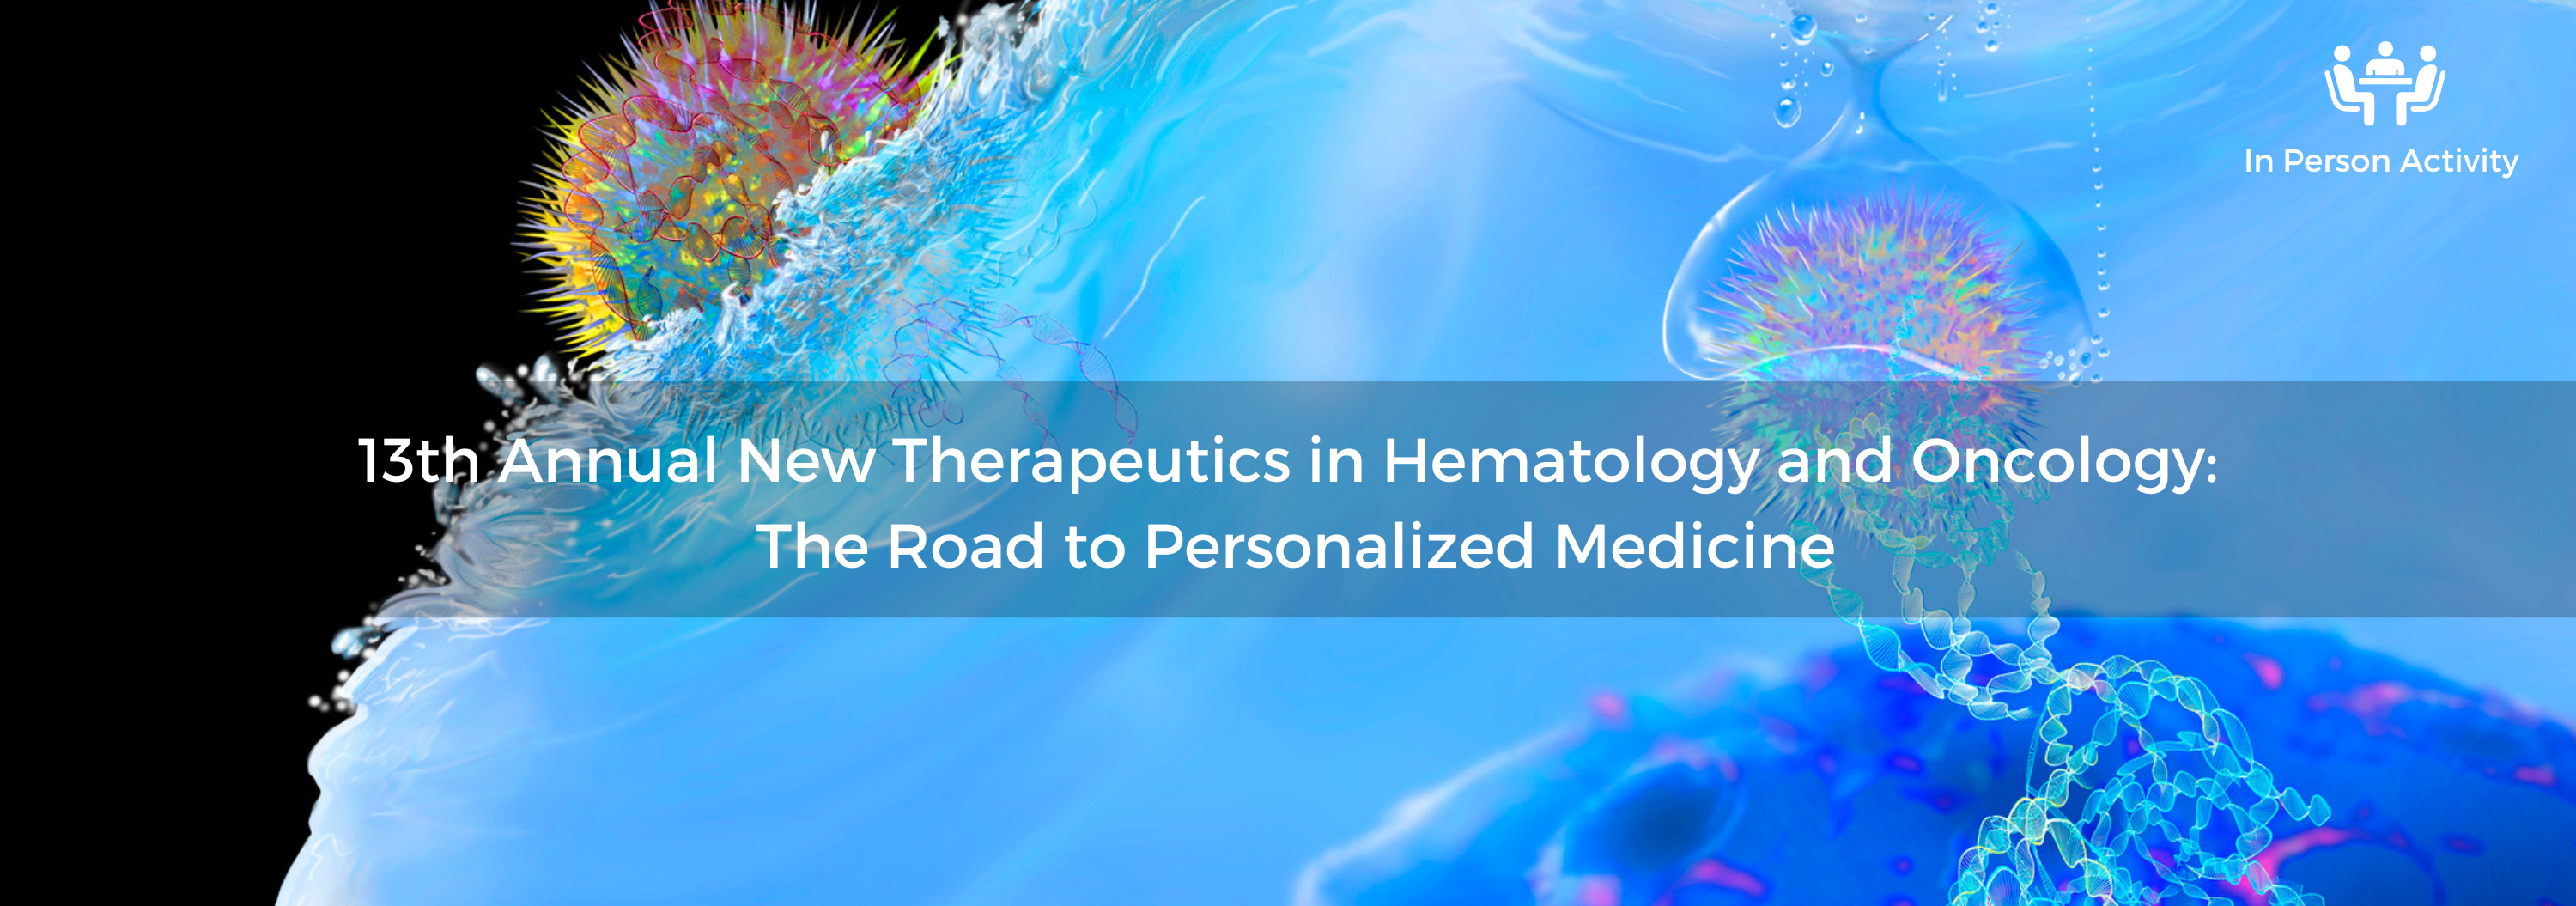 13th Annual New Therapeutics in Hematology and Oncology: The Road to Personalized Medicine Banner